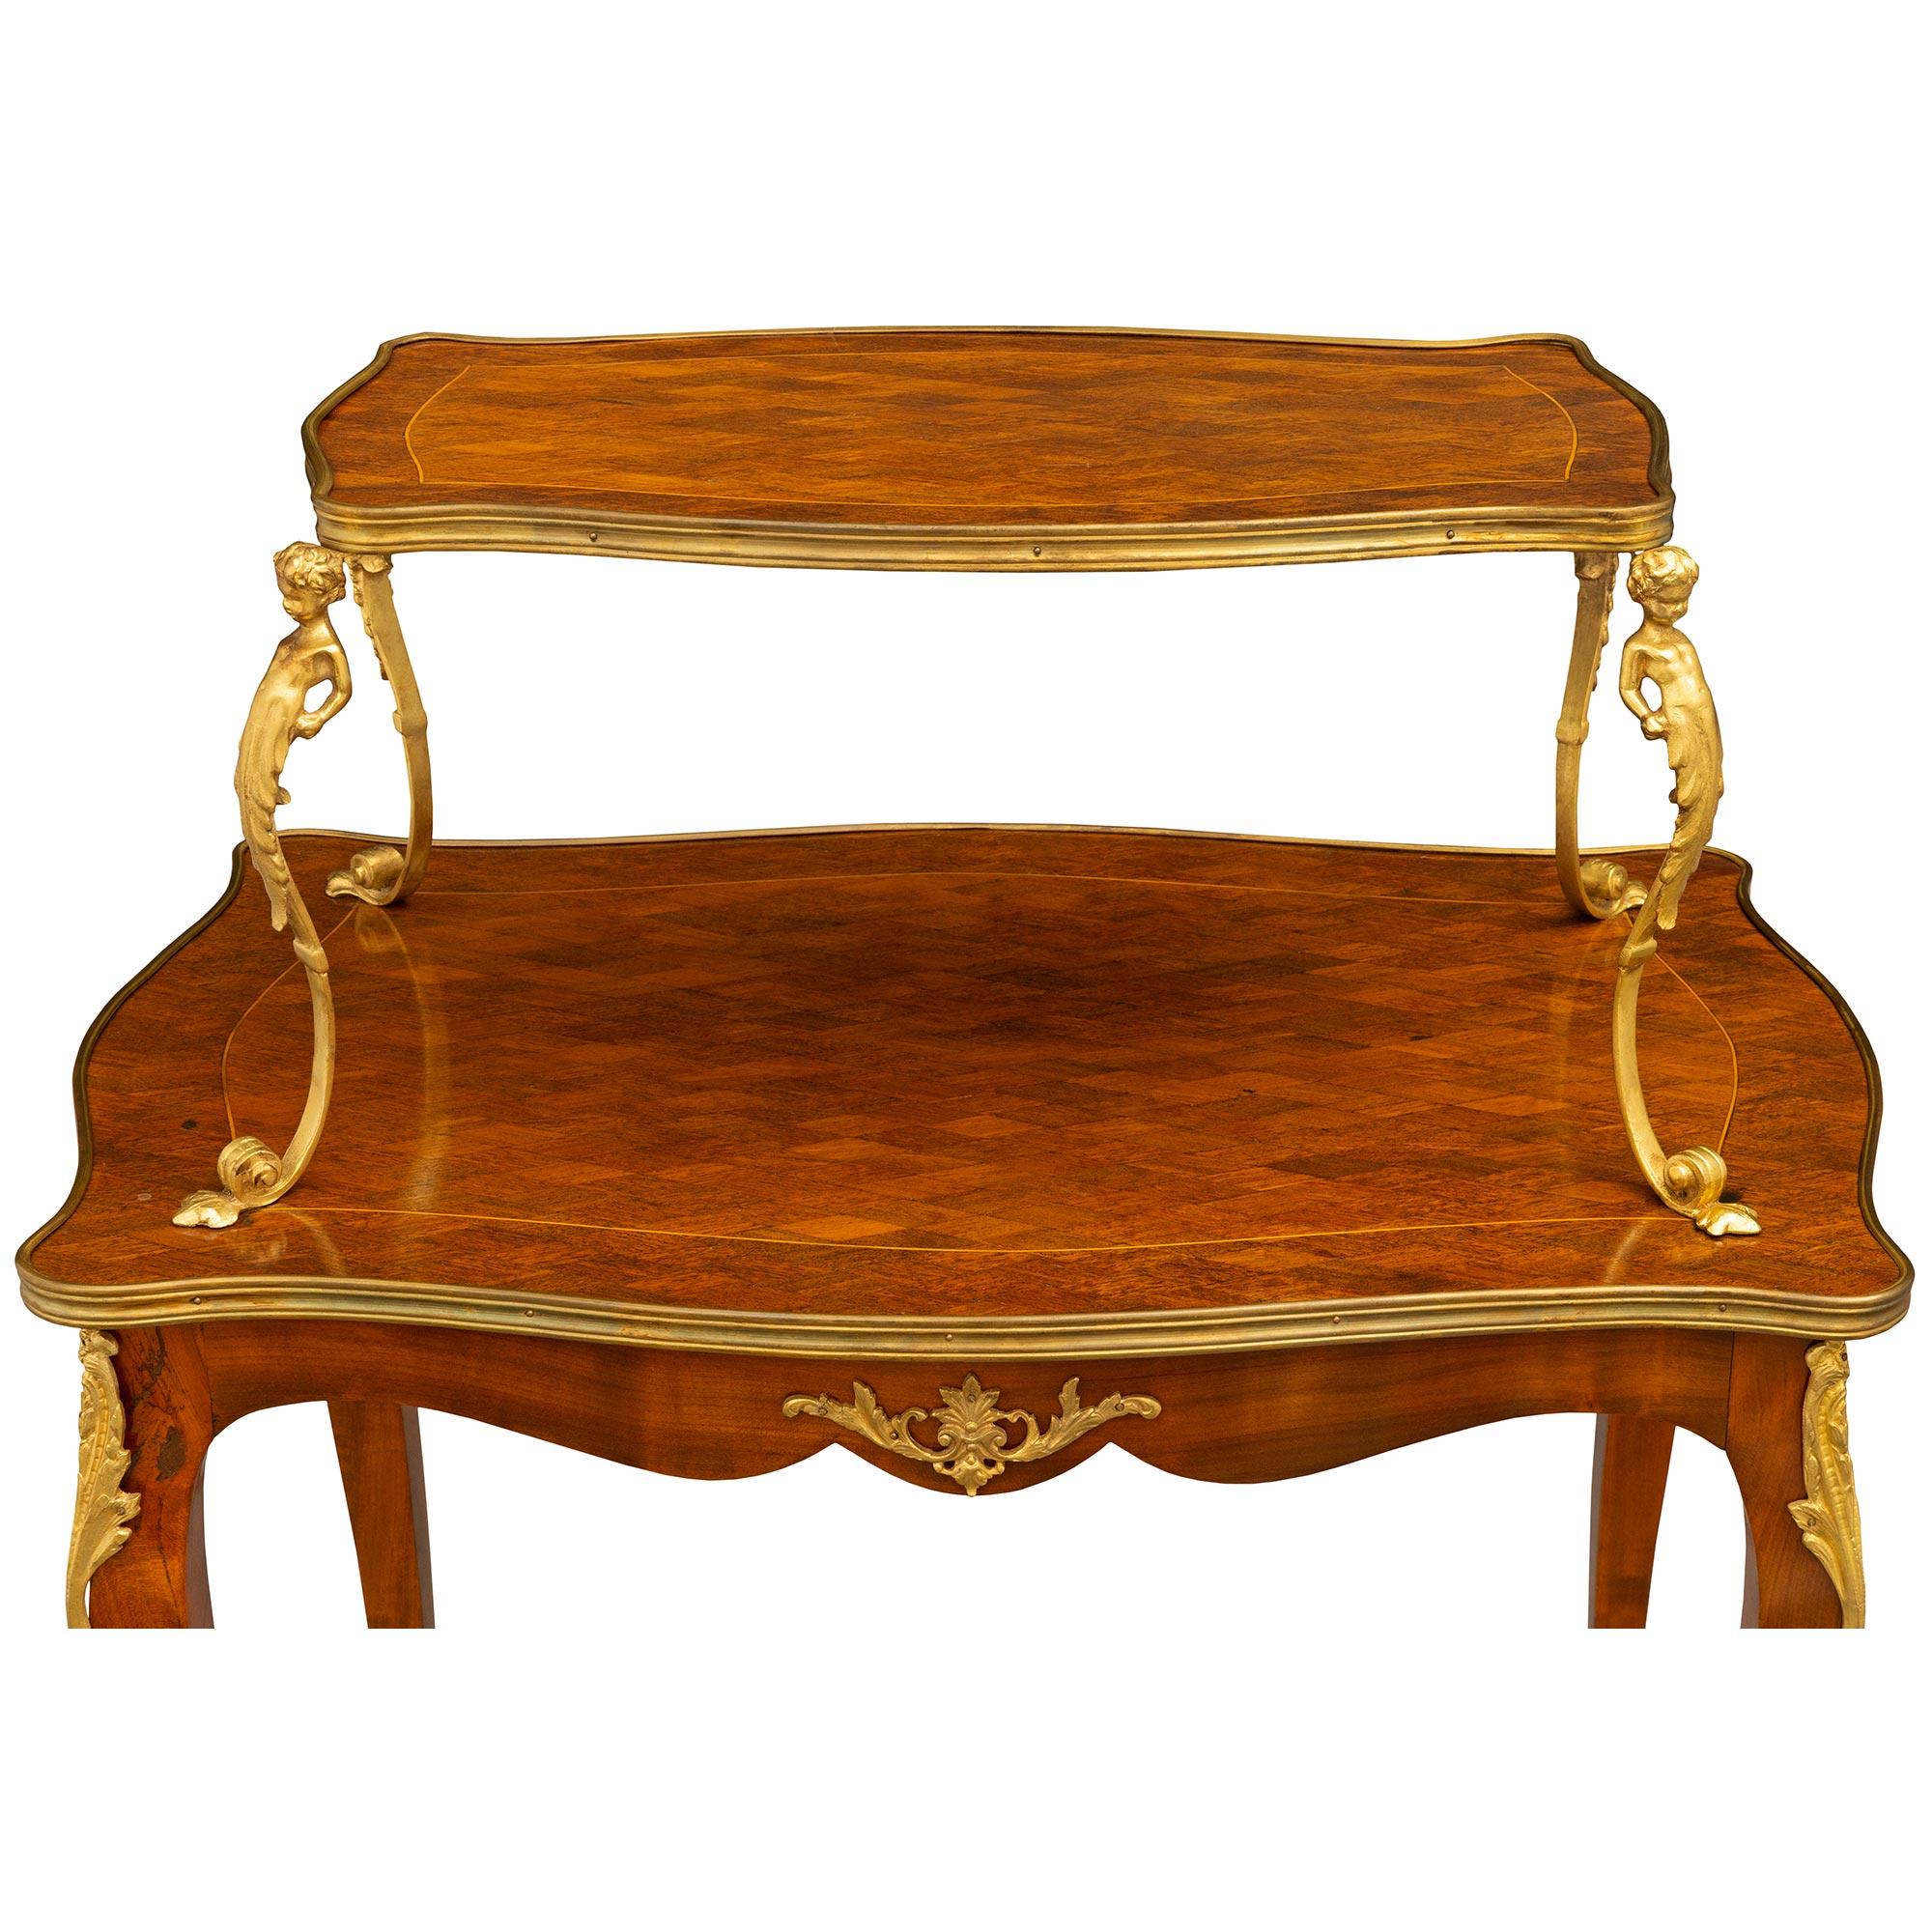 French 19th Century Louis XV Style Two-Tier Mahogany and Ormolu Serving Table For Sale 2